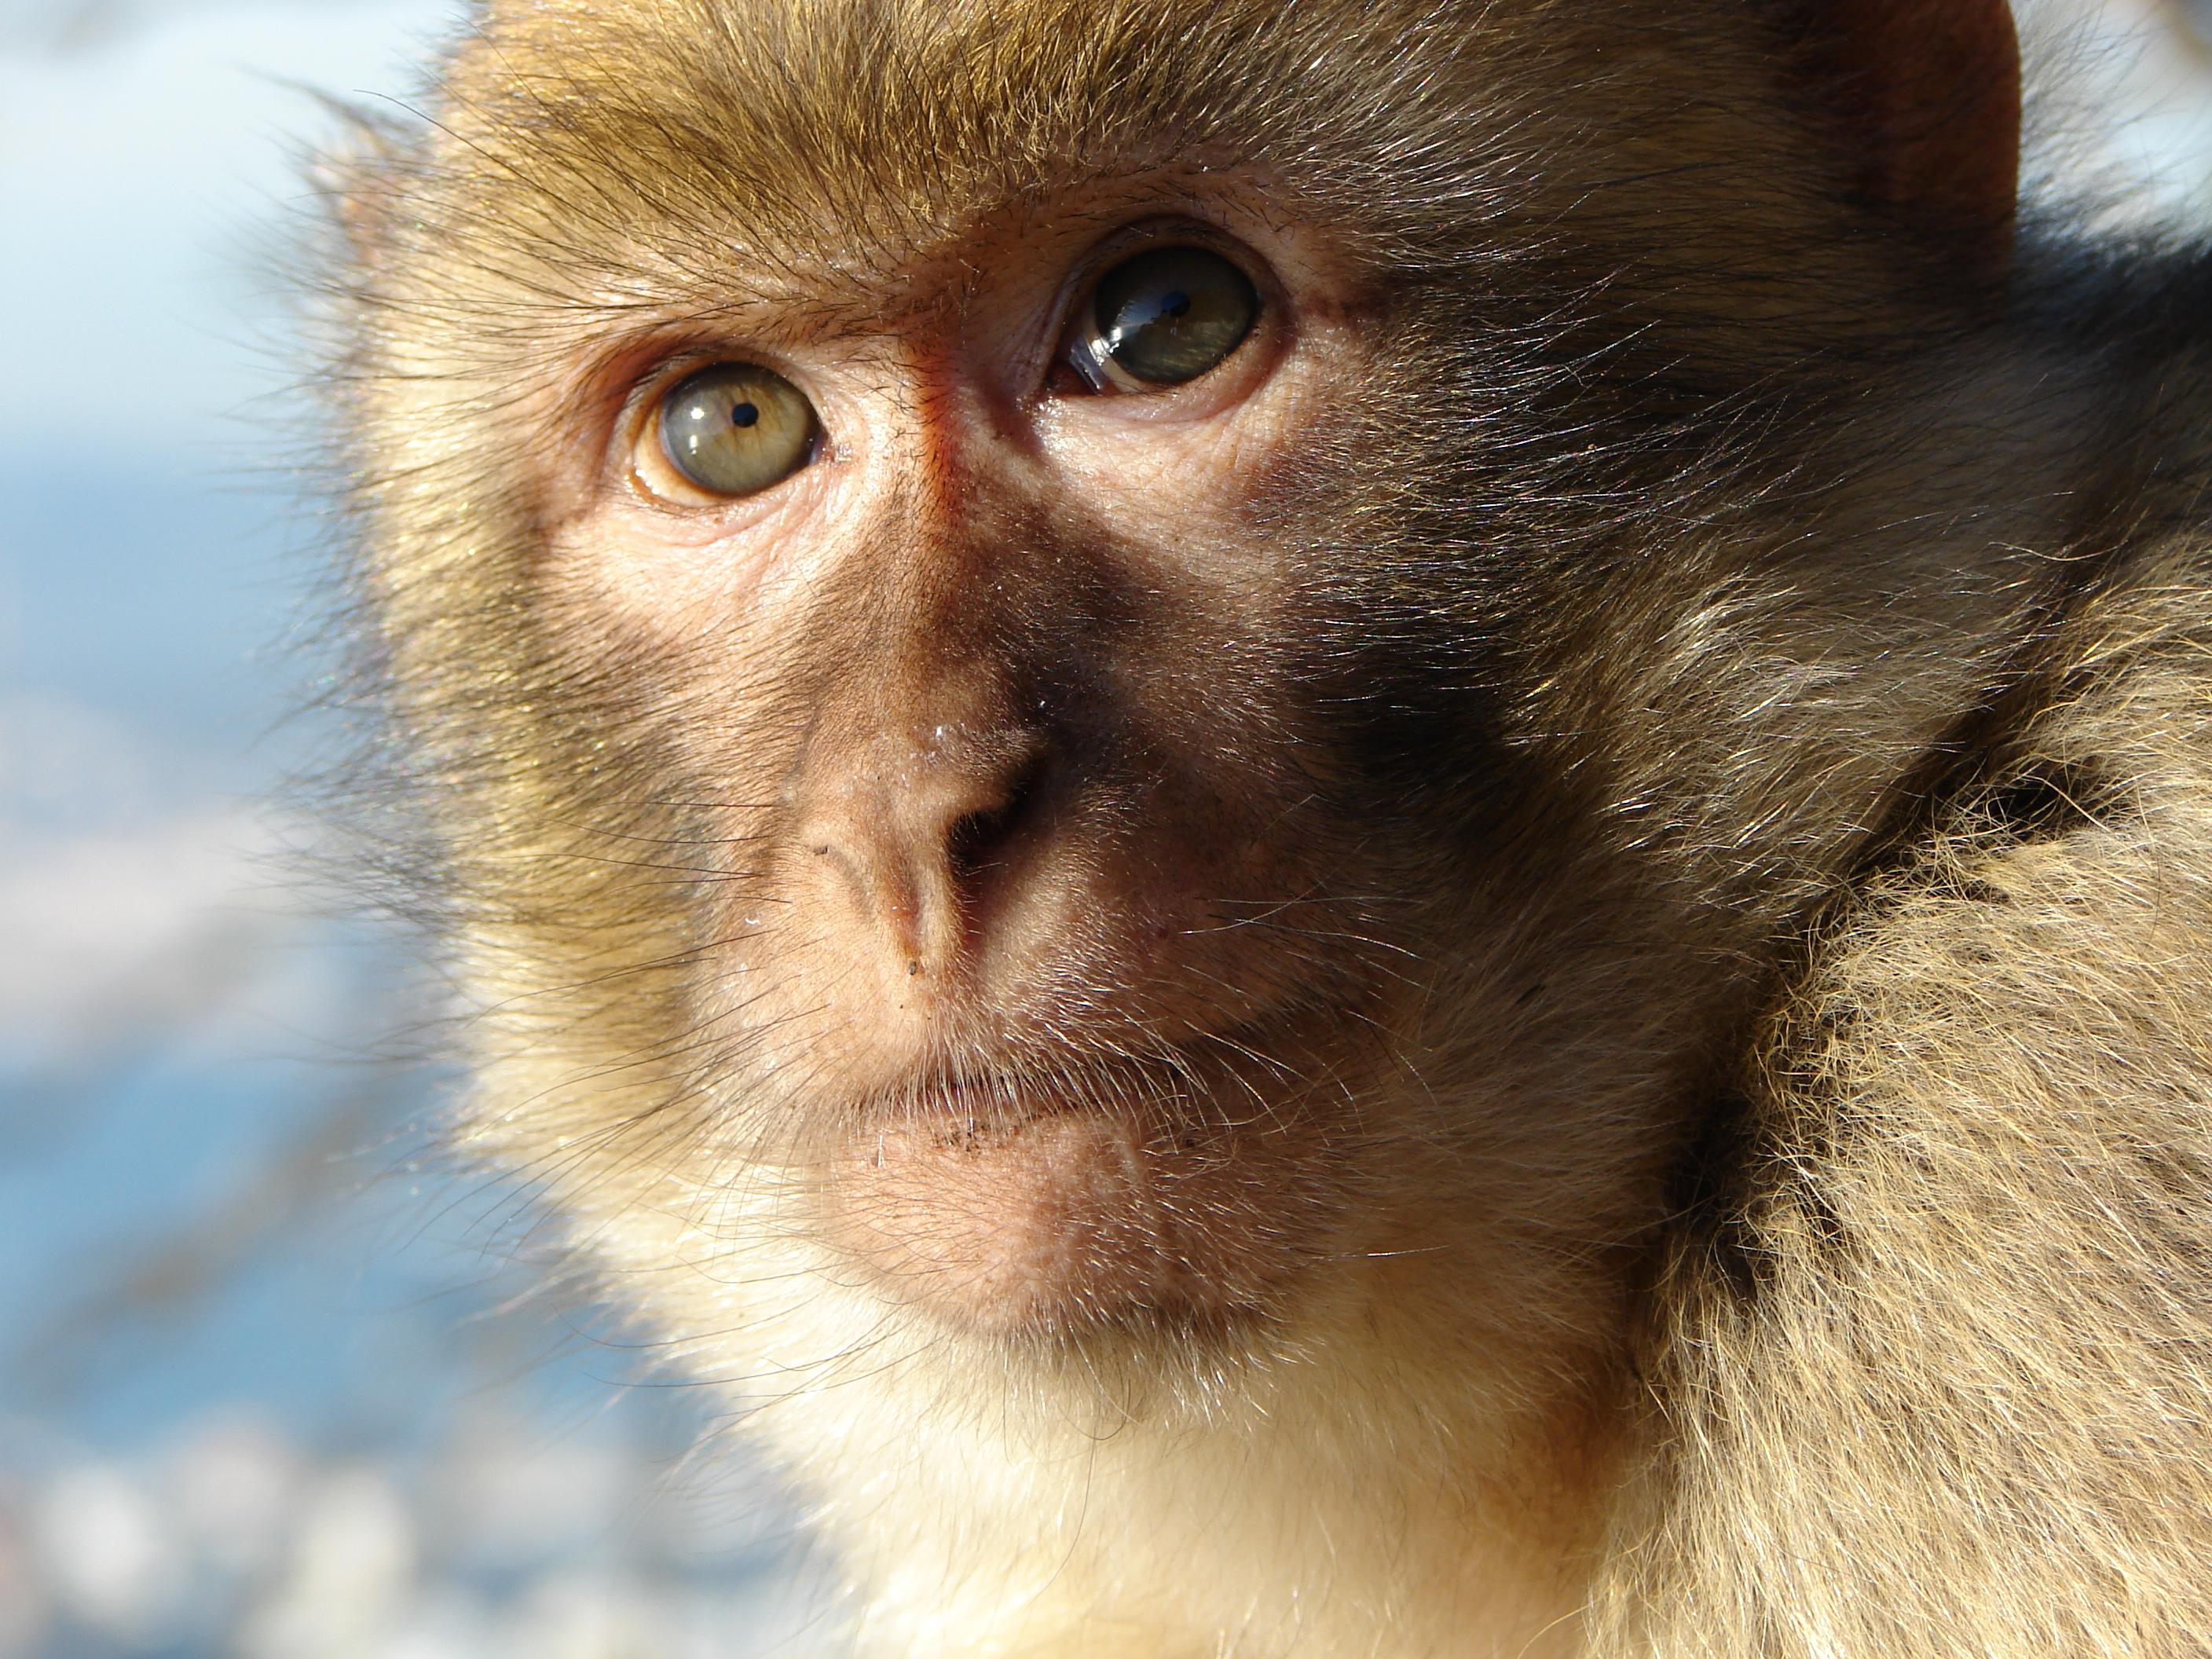 a macaque monkey with light brown fur facing the camera